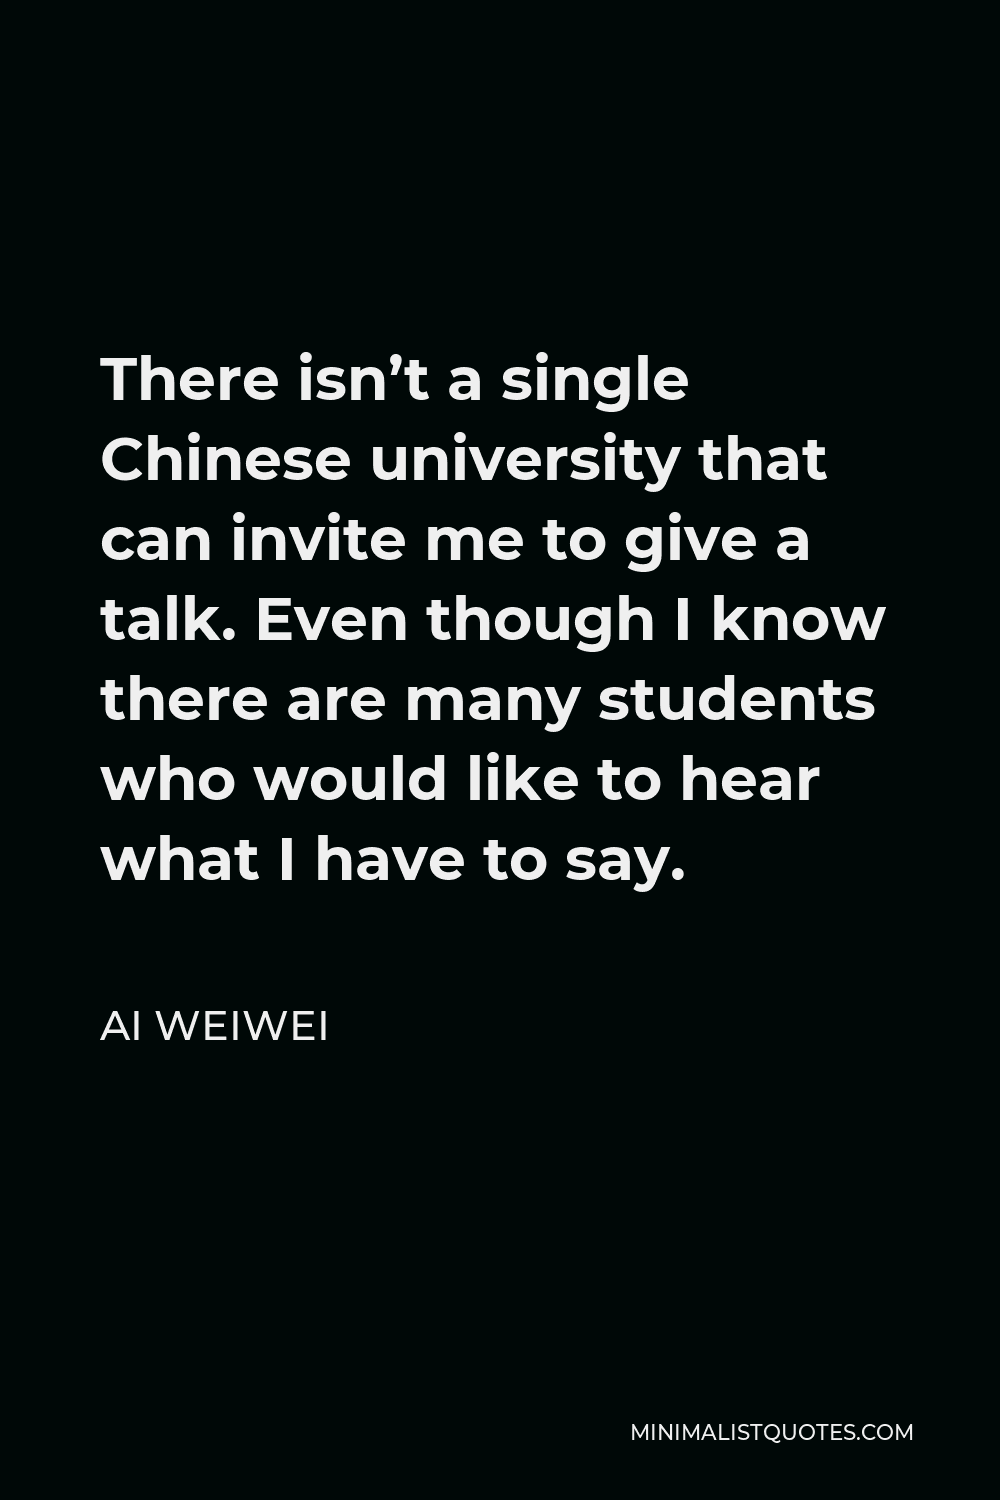 Ai Weiwei Quote - There isn’t a single Chinese university that can invite me to give a talk. Even though I know there are many students who would like to hear what I have to say.